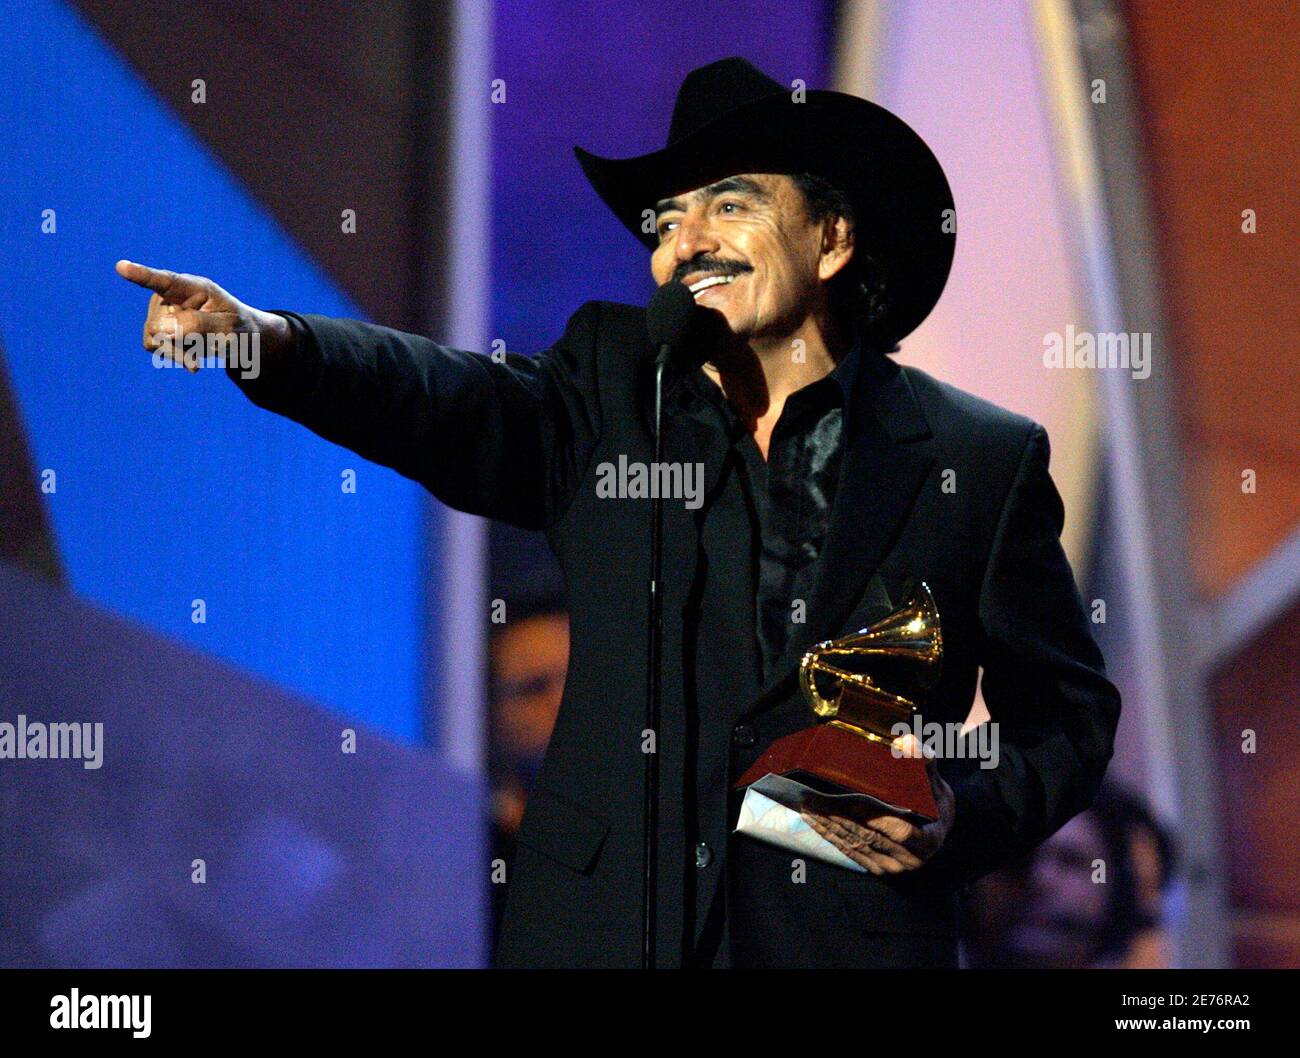 Joan Sebastian accepts the award for Best Banda Album for the song "Mas  Alla Del Sol" at the 7th annual Latin Grammy Awards in New York November 2,  2006. REUTERS/Gary Hershorn (UNITED